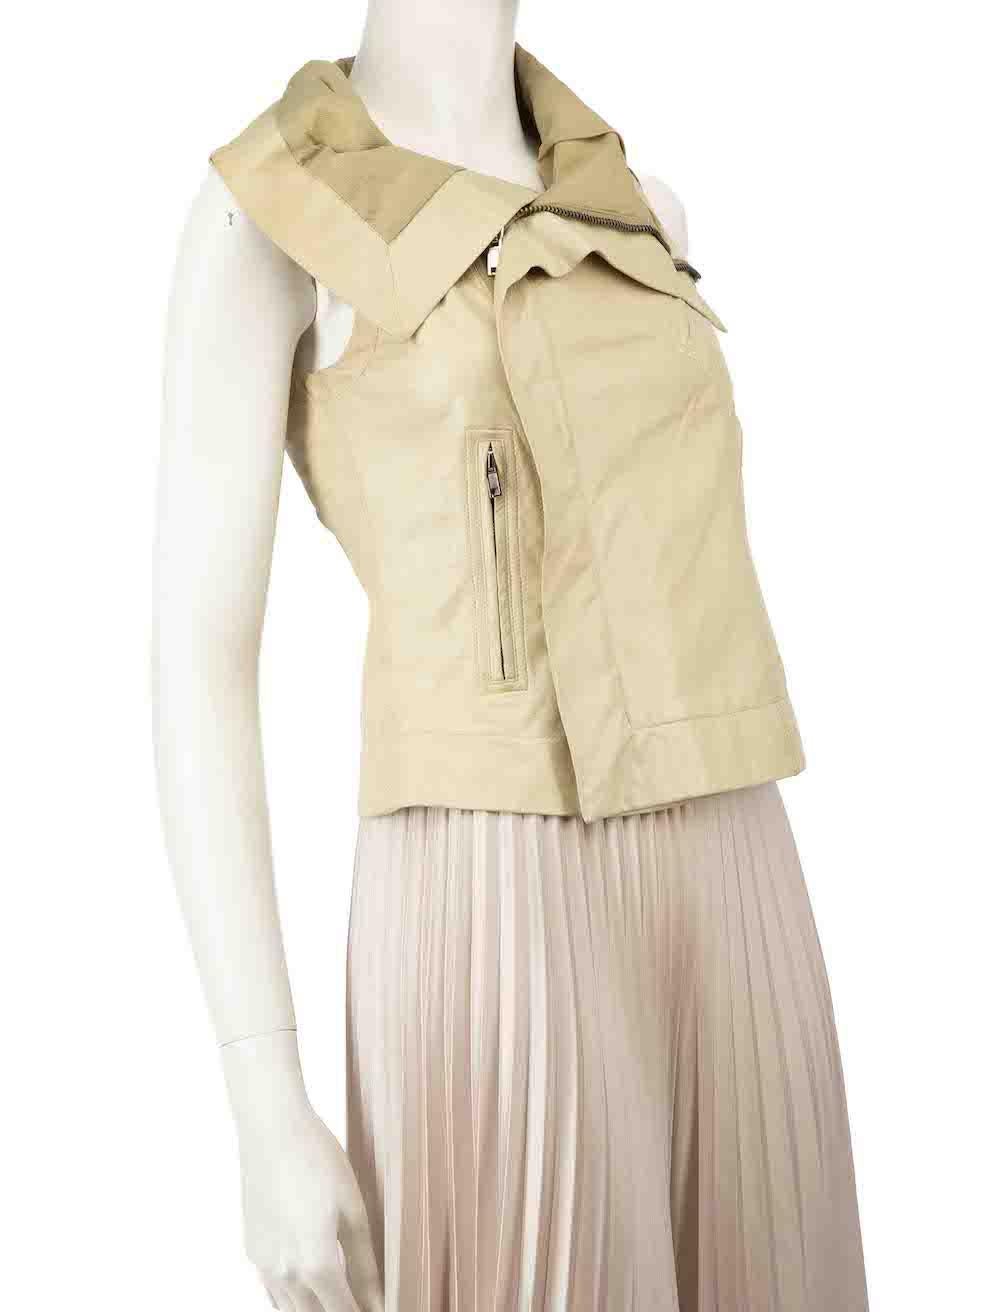 CONDITION is Good. Minor wear to vest is evident. Light discolouration and scratches on the front, back and armhole area. Marks around the inside neck area and lining on this used Rick Owens designer resale item.
 
 
 
 Details
 
 
 Beige
 
